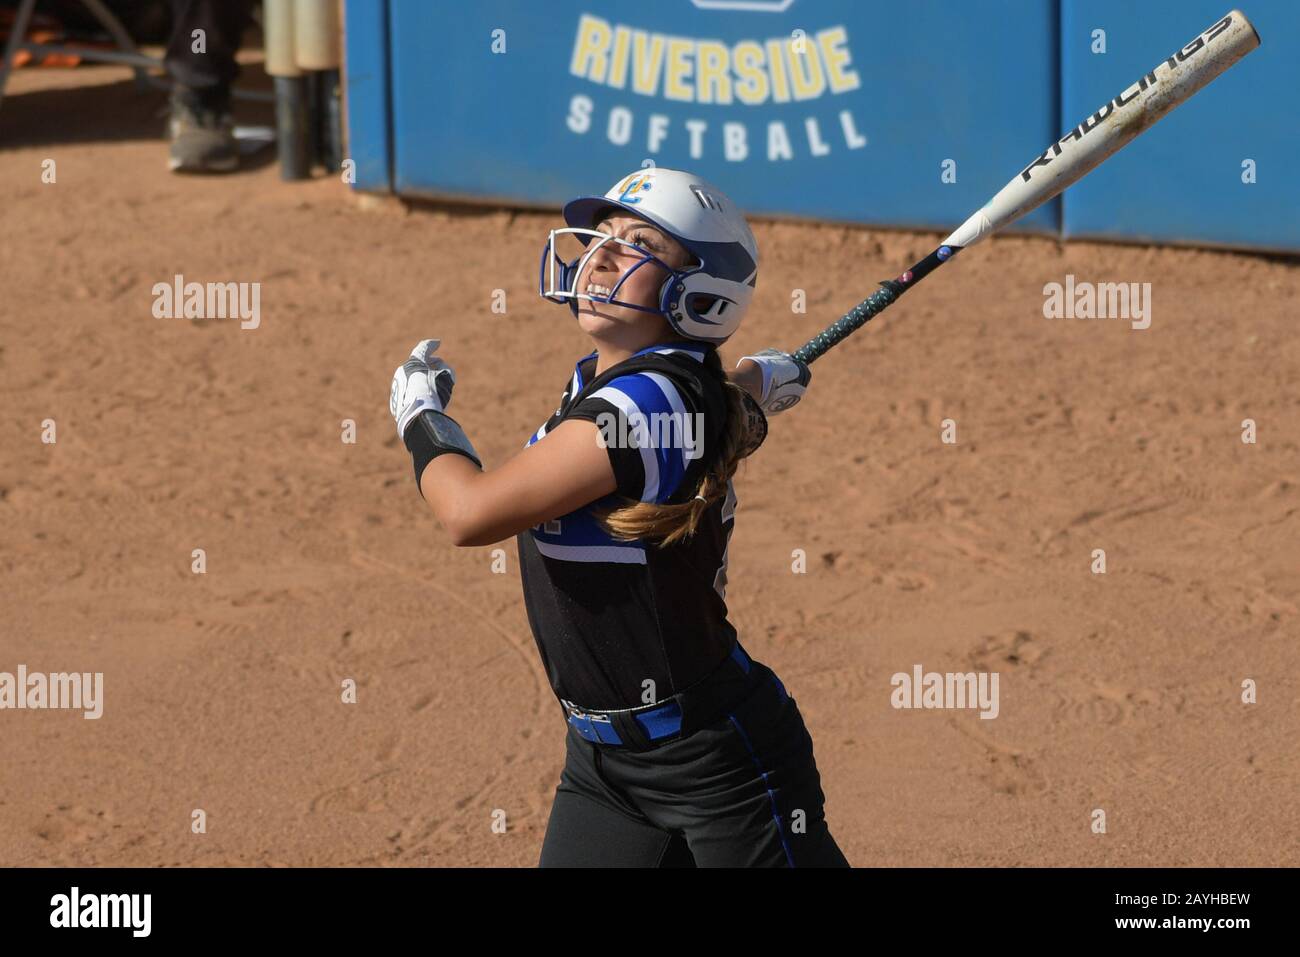 UC Riverside Highlanders infielder Emma Ramelot (22) hits the ball during an NCAA softball game against Idaho State on Friday, Feb. 14, 2020 in Riverside, Calif. UC Riverside defeated Idaho 2-1. (Photo by IOS/ESPA-Images) Stock Photo